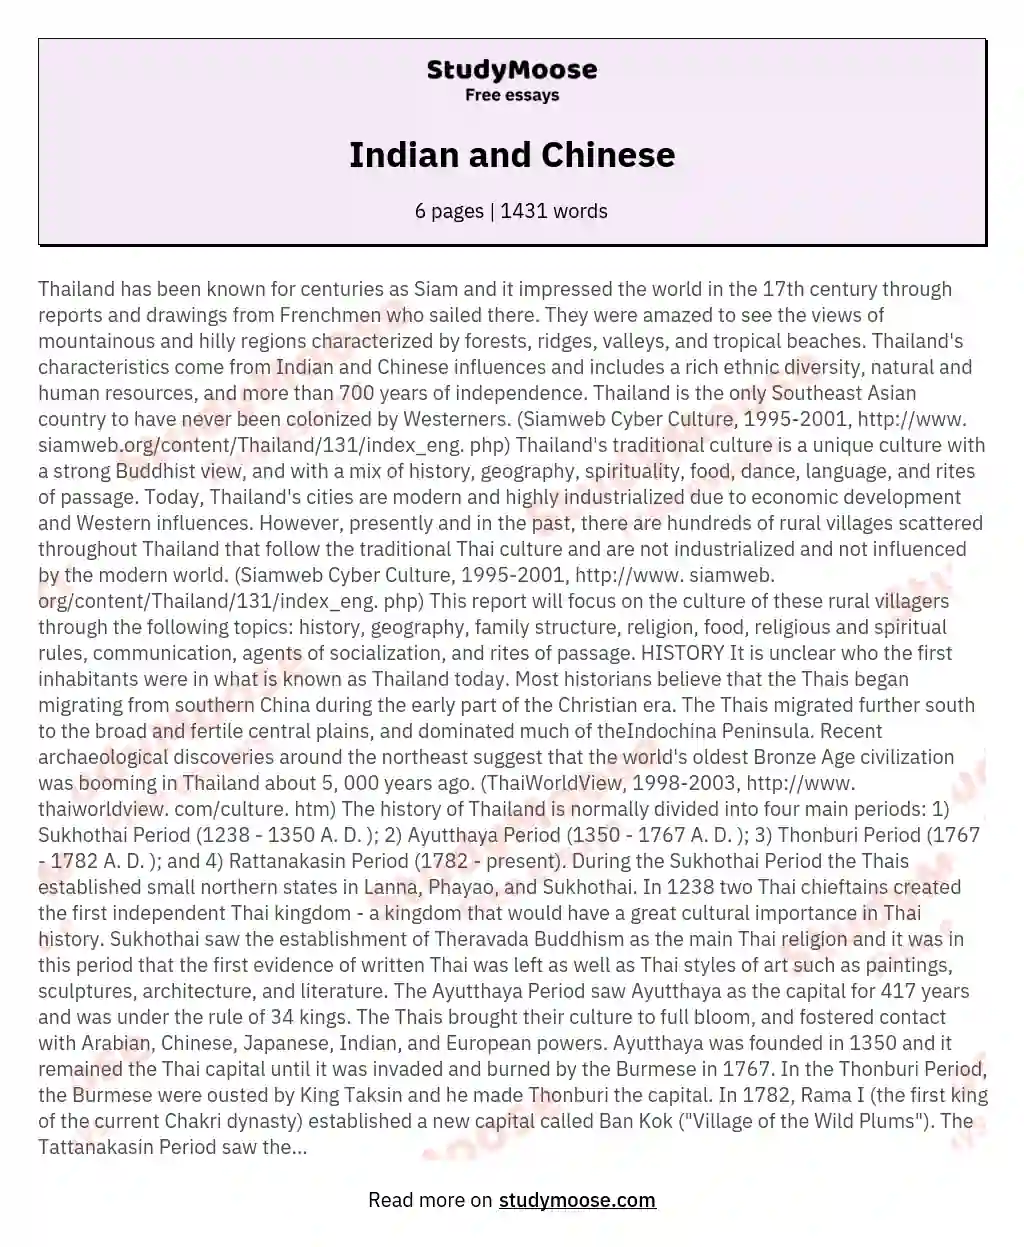 Indian and Chinese essay